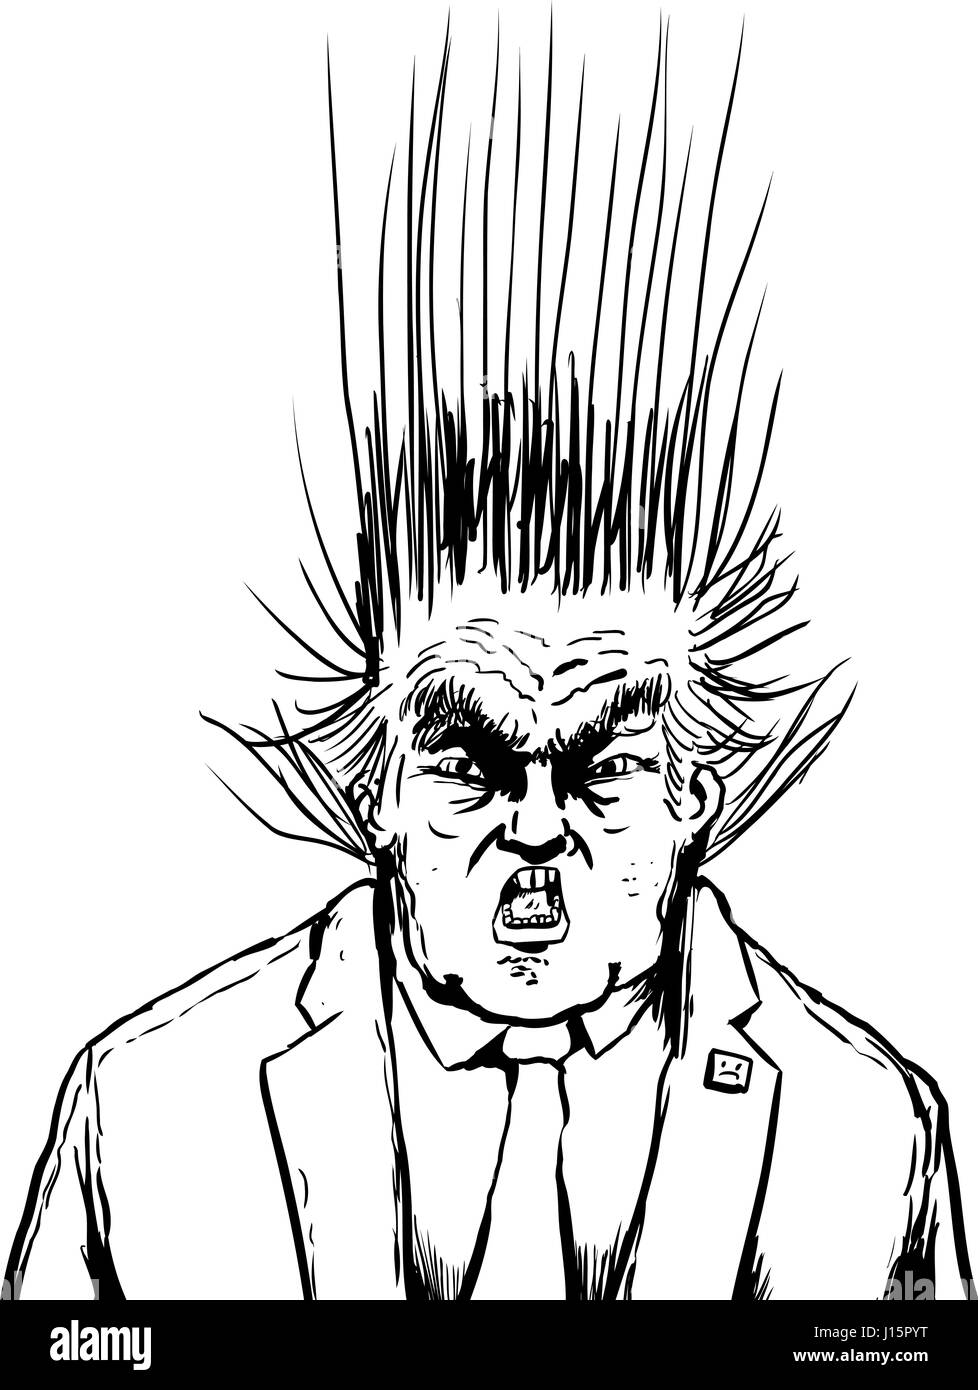 April 18, 2017. Outline sketch of Donald Trump with hair standing up while he screams Stock Photo